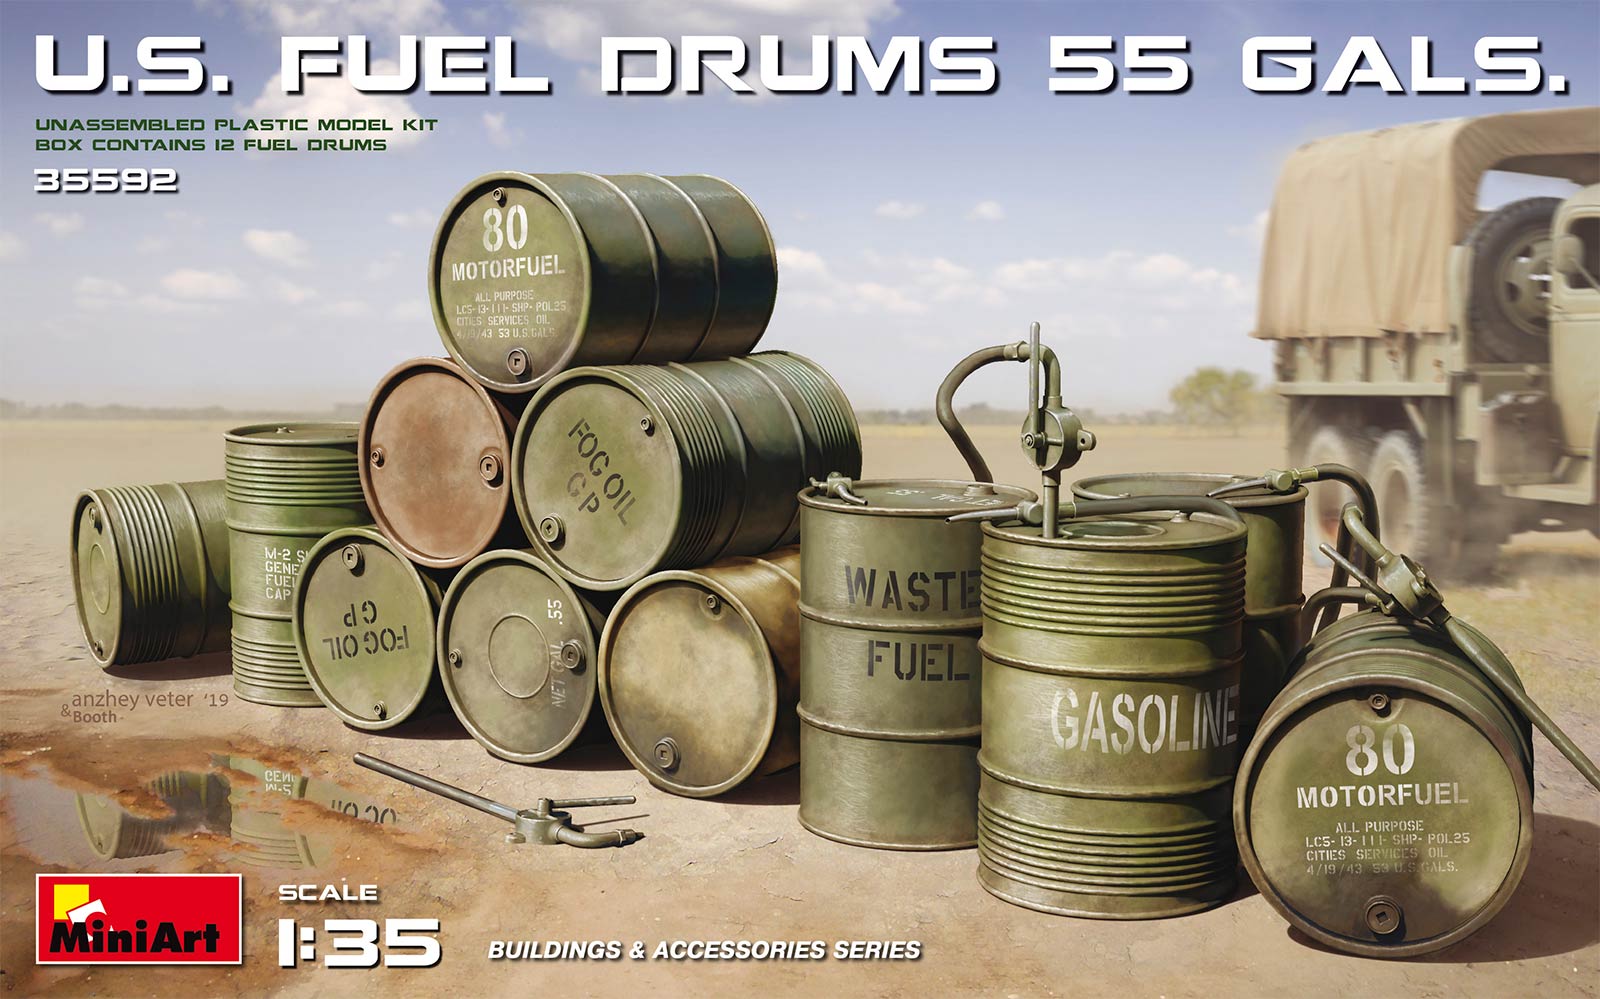 MiniArt 35592 WWII 12 USA Army Military 55 Gal Fuel Drums Plastic Model Kit 1 35 for sale online